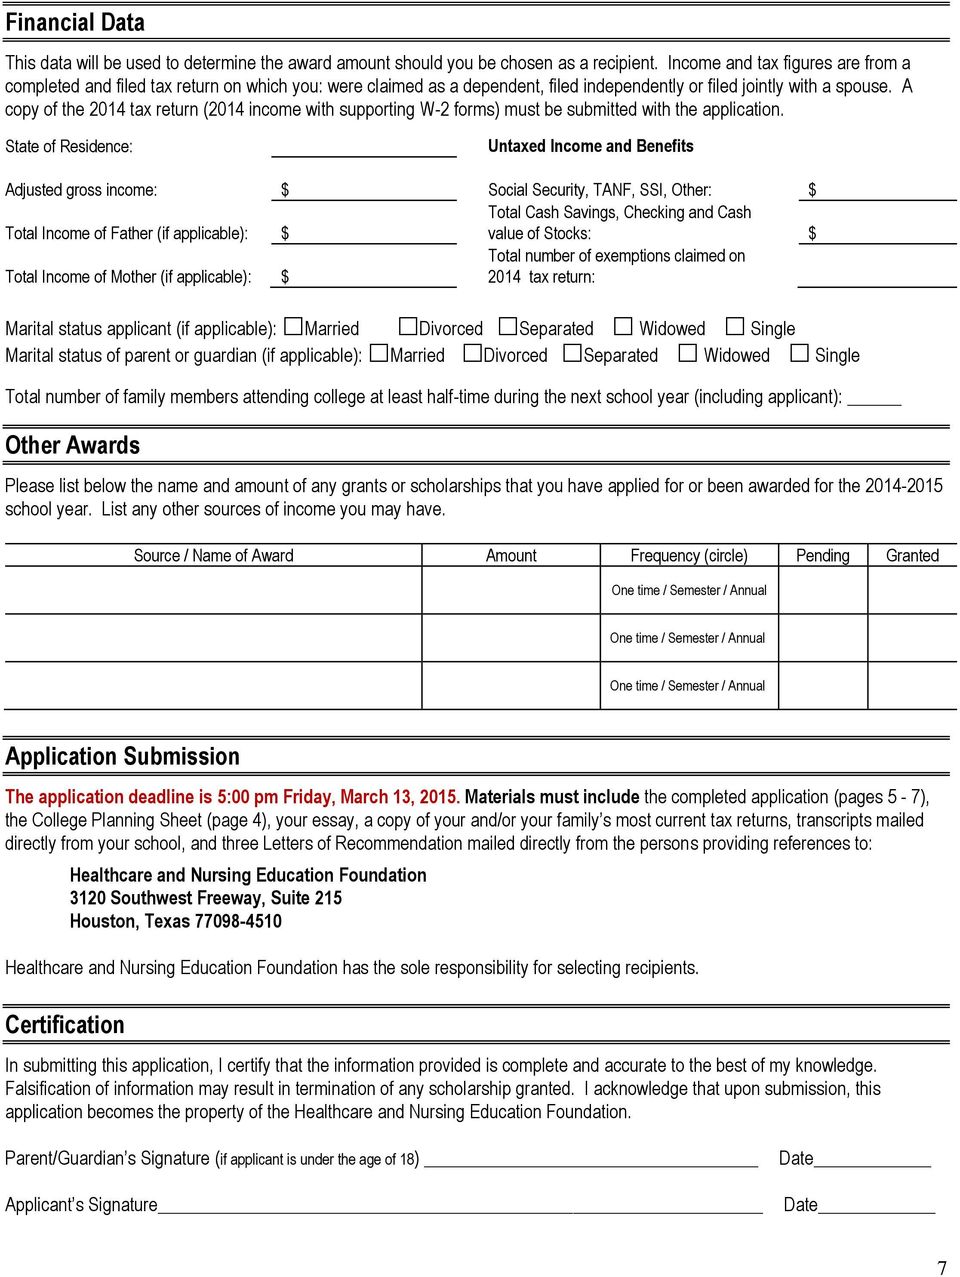 A copy of the 2014 tax return (2014 income with supporting W-2 forms) must be submitted with the application.